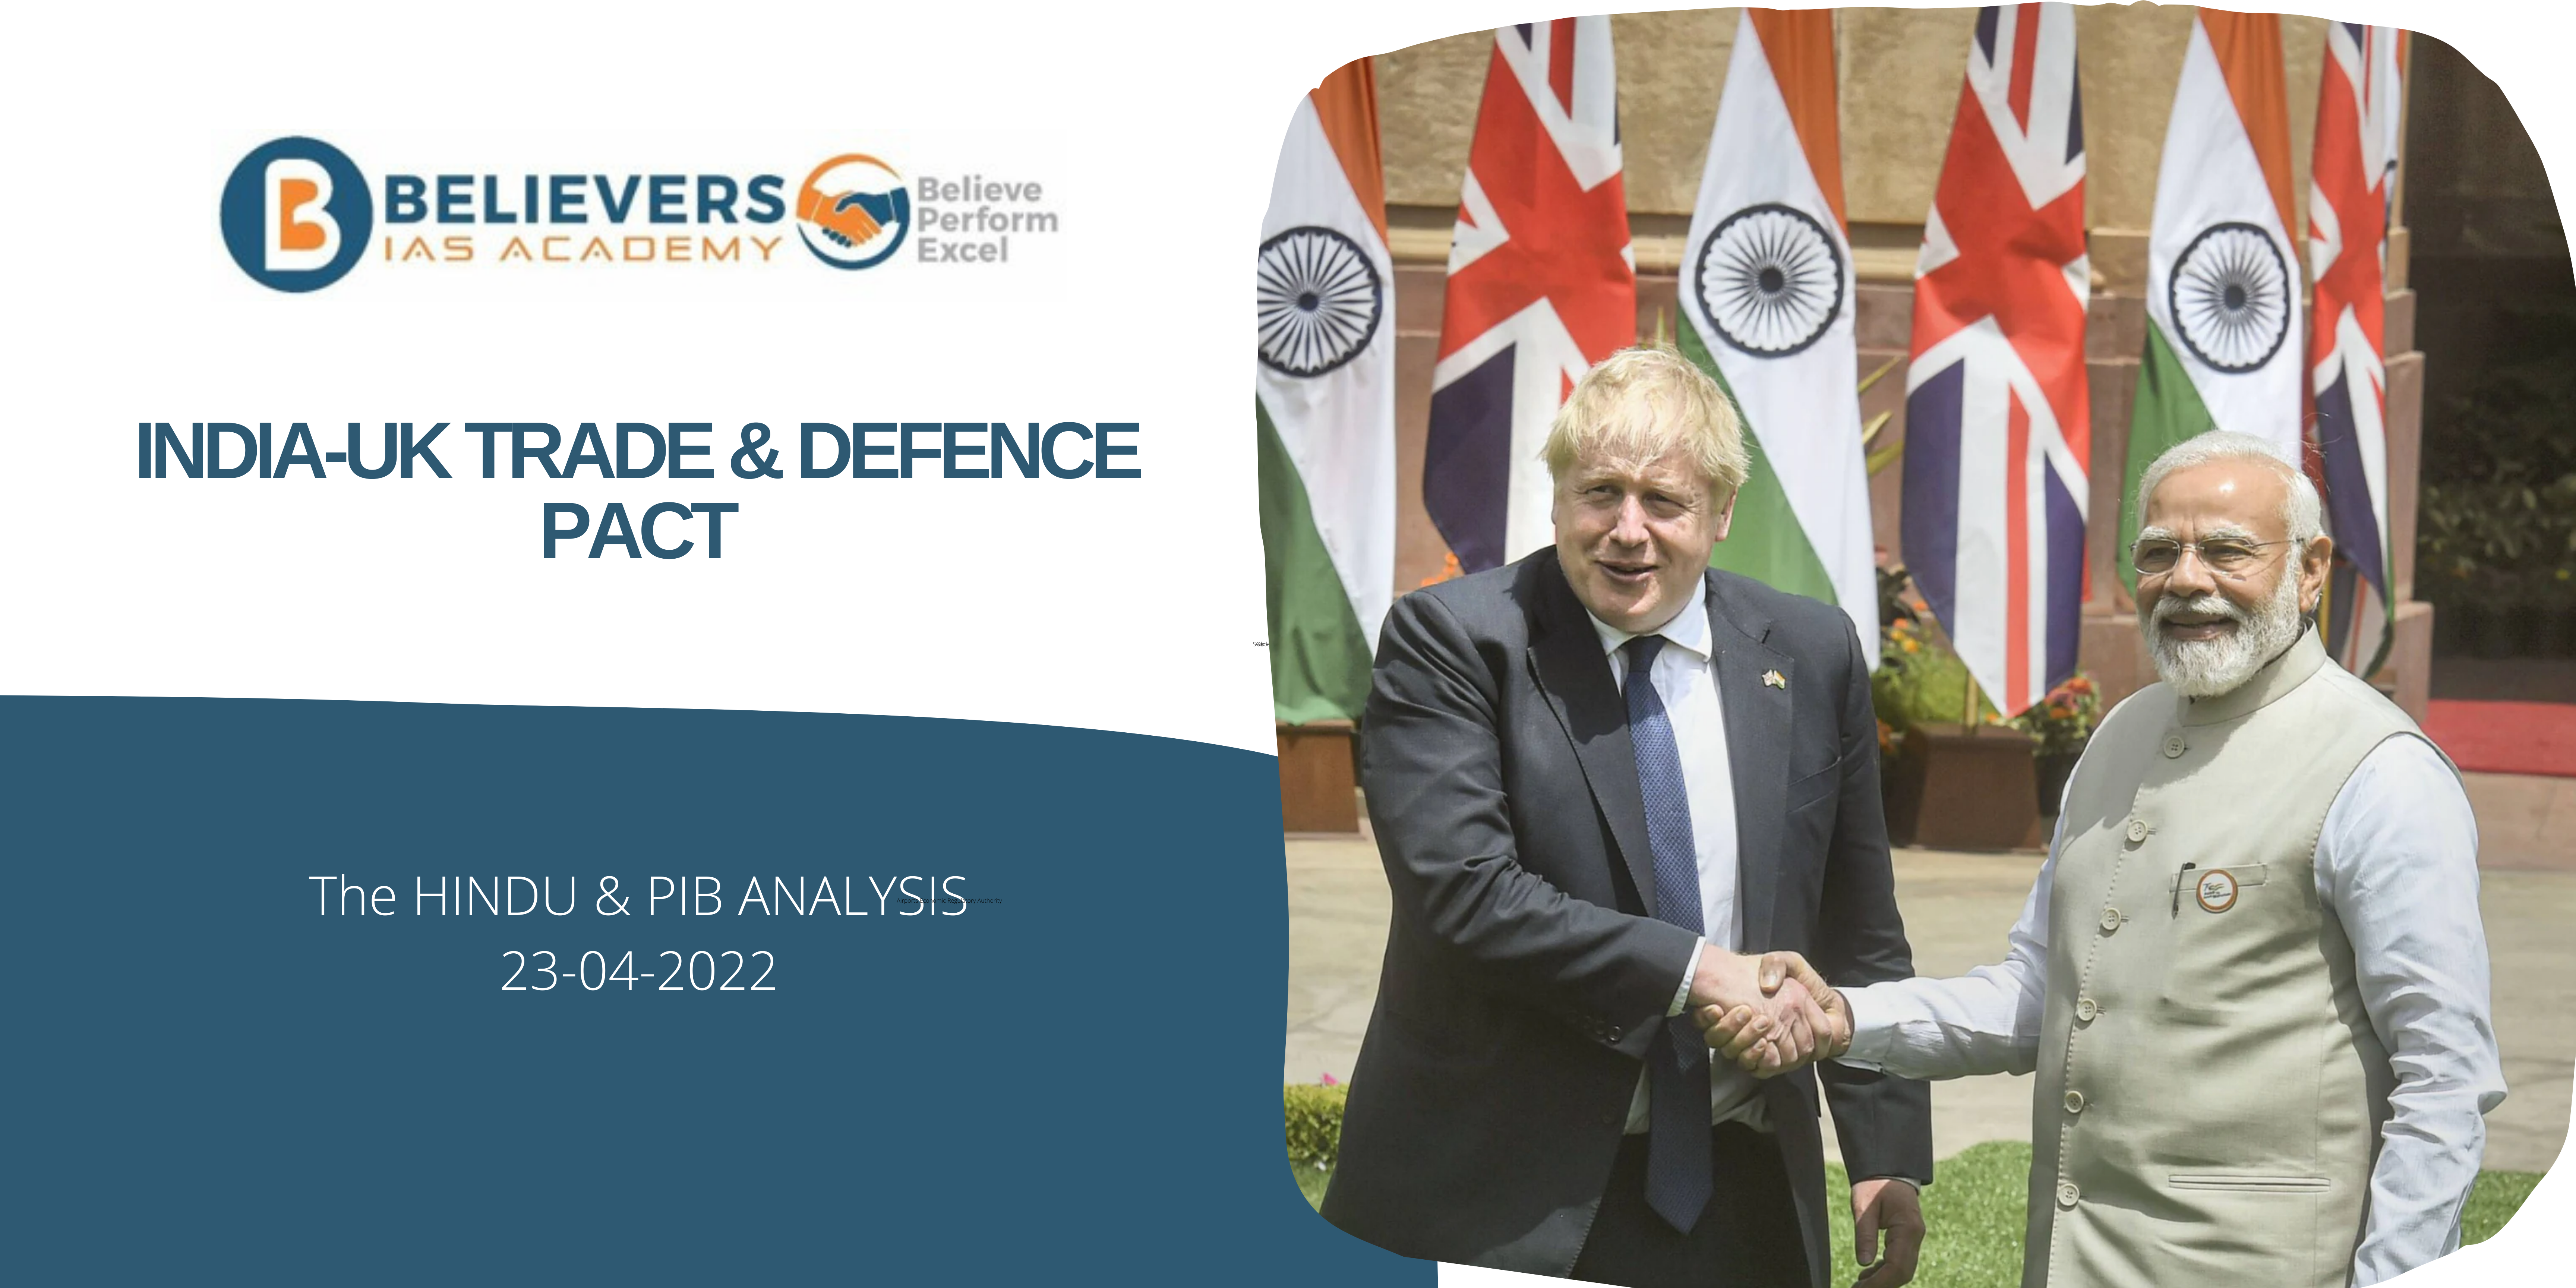 UPSC Current affairs - India - UK Trade & Defence Pact